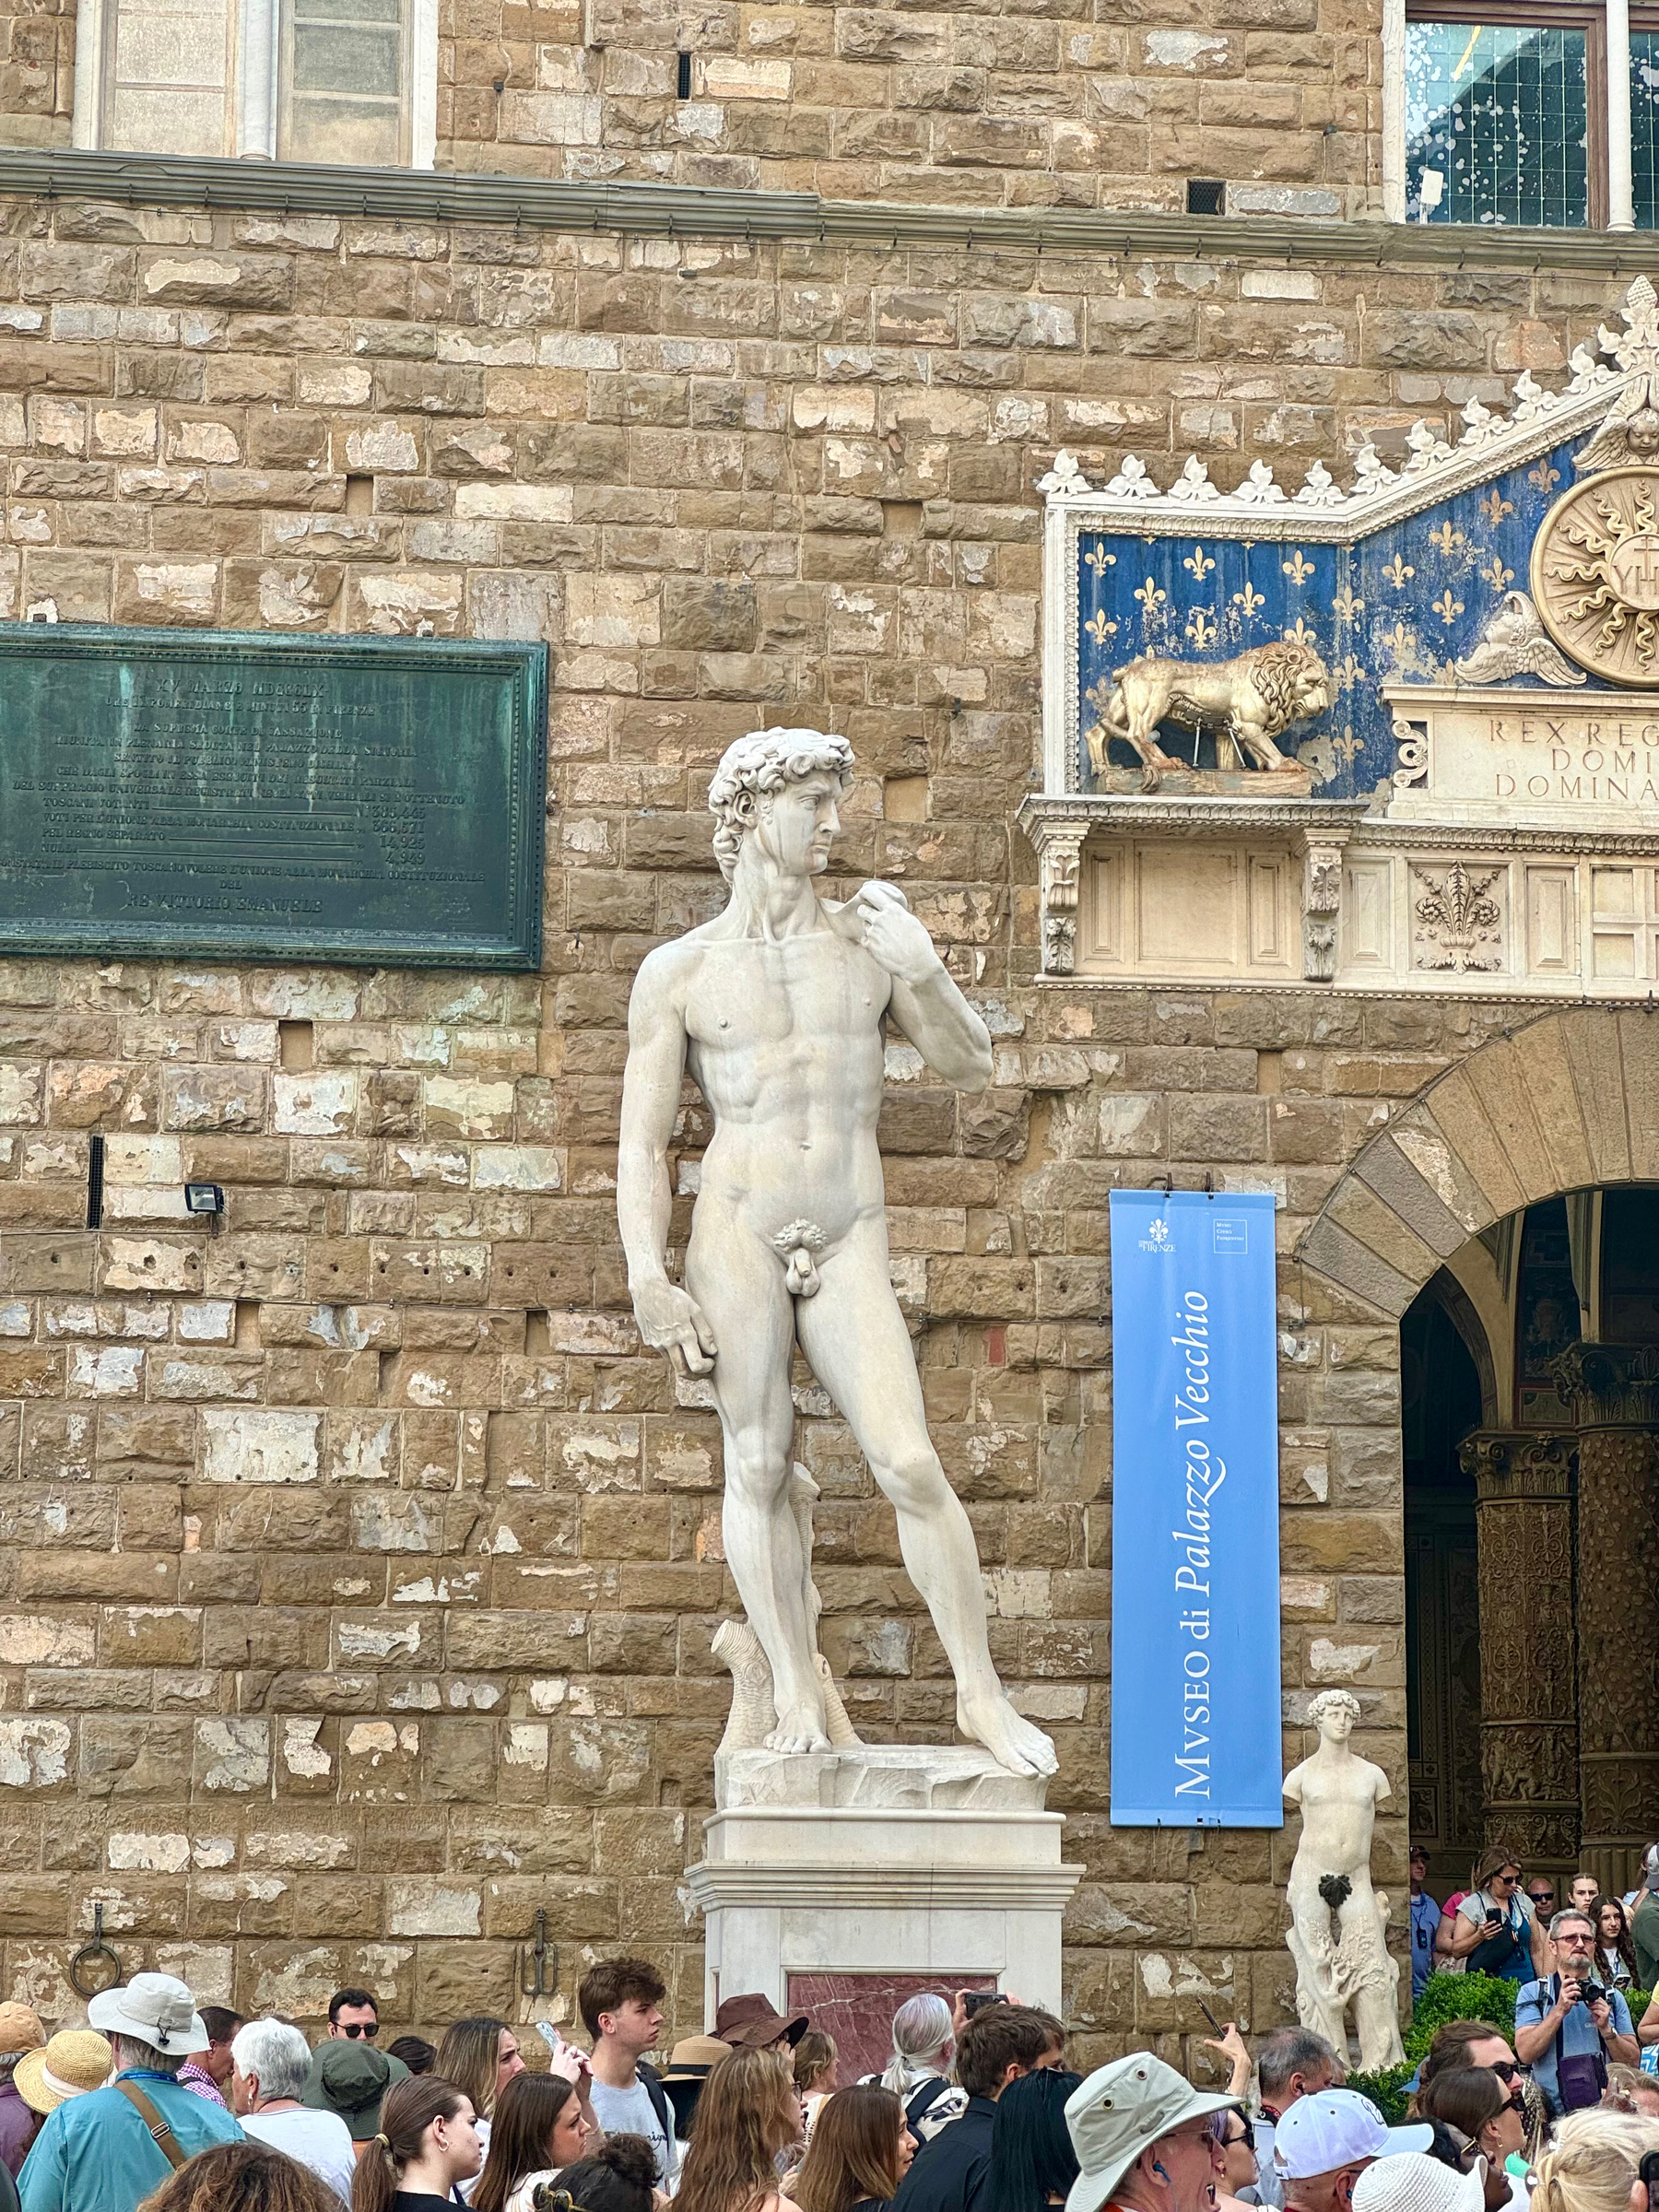 The image captures a replica of Michelangelo’s statue of David displayed outside the Palazzo Vecchio in Florence, Italy. Surrounding the statue is a crowd of tourists. The stone facade of the Palazzo Vecchio and a blue banner for the museum are visible. 